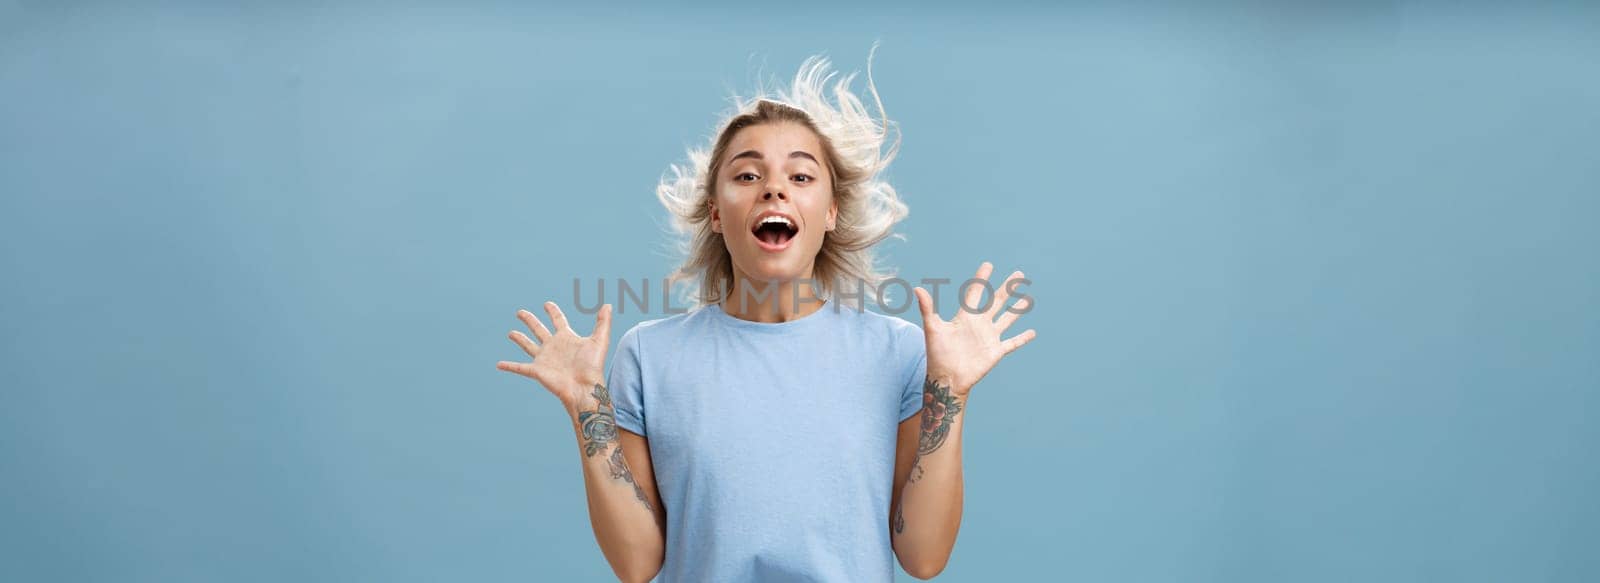 Creative happy and playful beautiful blond girl with tattoos on arms raising palms up opening mouth facing wind while hair strands flicking on air jumping having fun over blue background by Benzoix